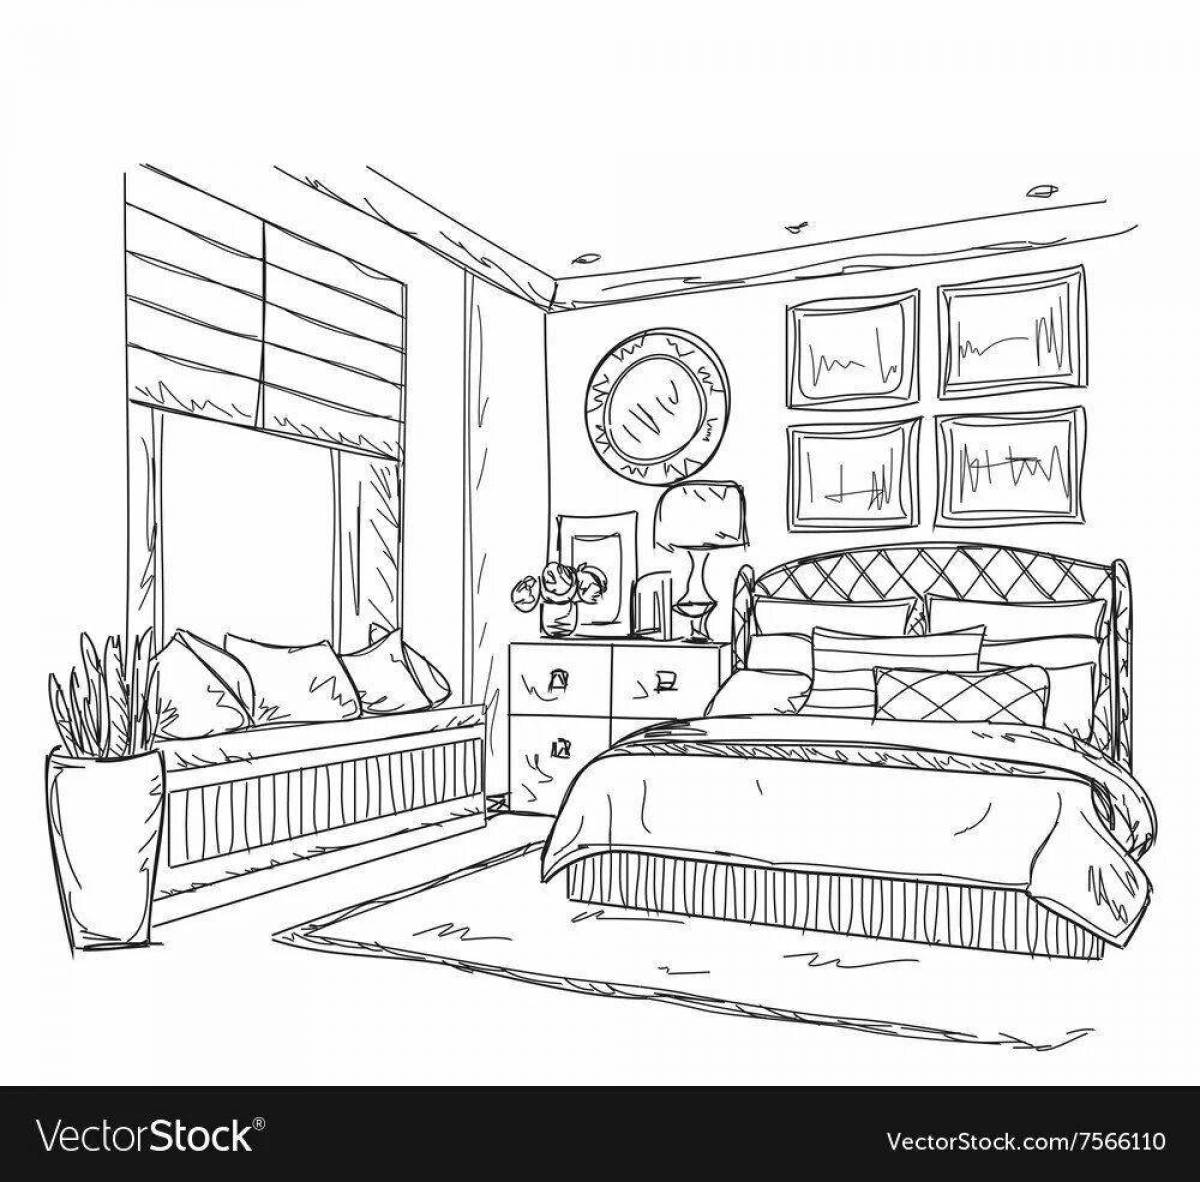 Living room eater coloring page